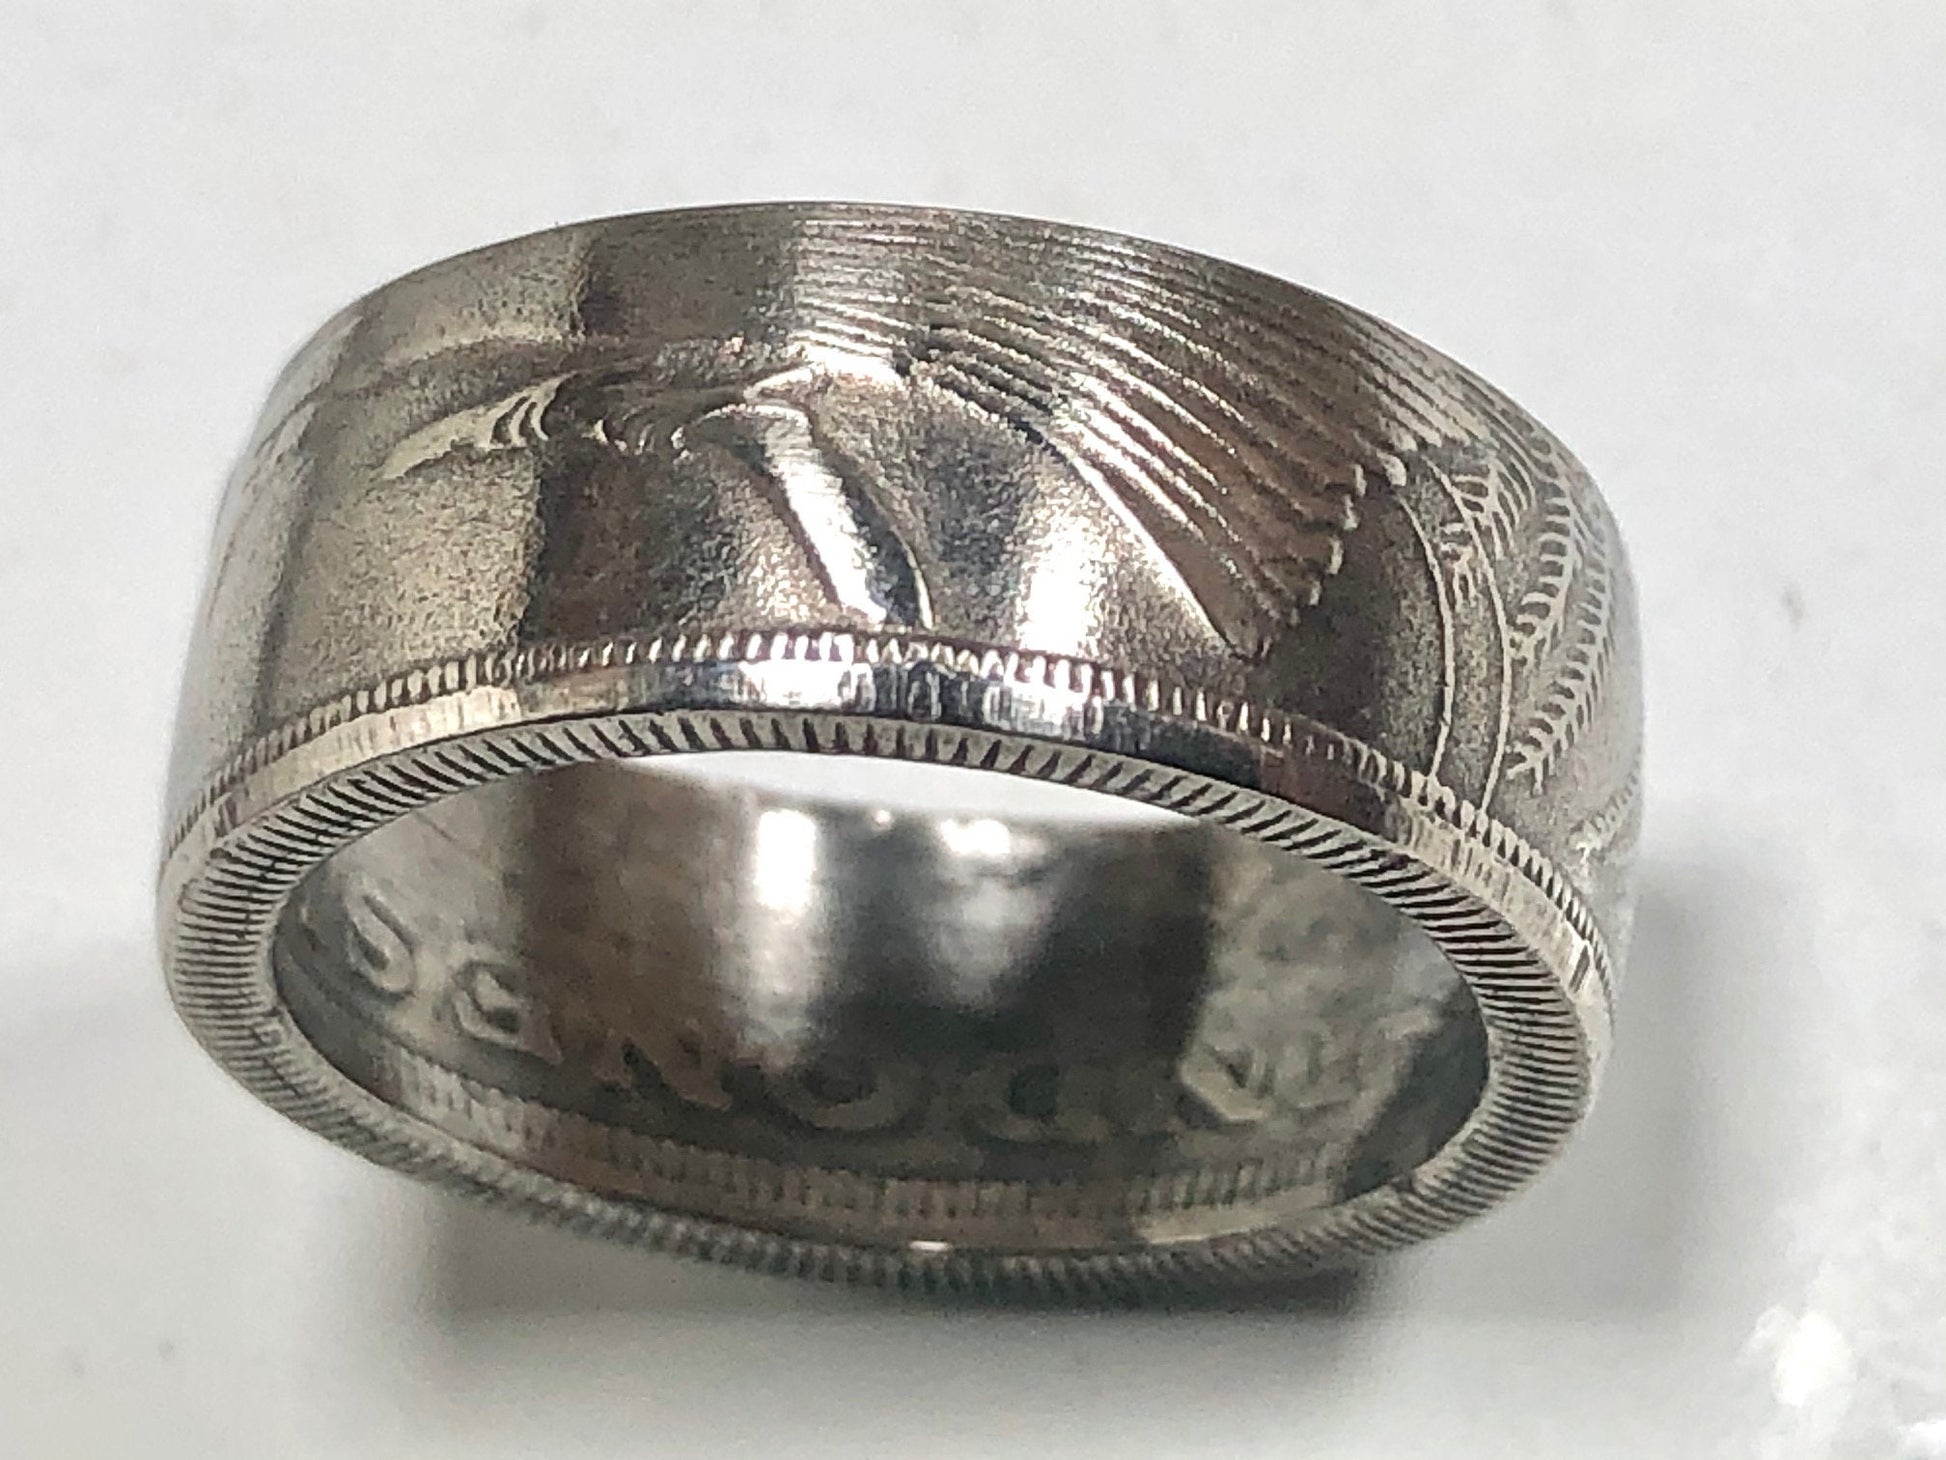 Indonesia Coin Ring 50 Rupiah Indonesian Handmade Personal Custom Ring Gift For Friend Coin Ring Gift For Him Her World Coin Collector